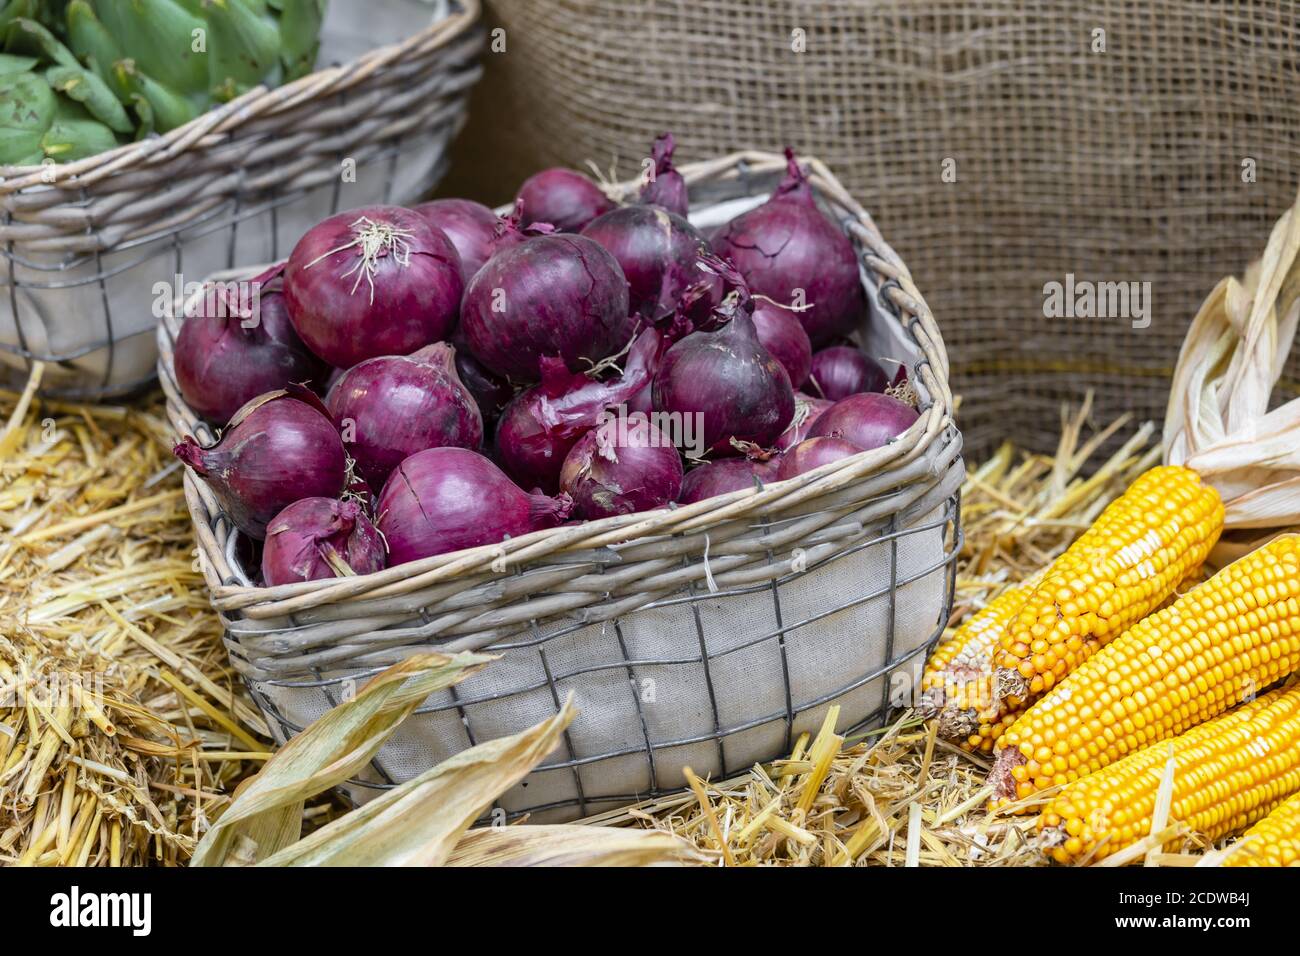 Market stall with red onions in the basket and with corncobs on straw Stock Photo